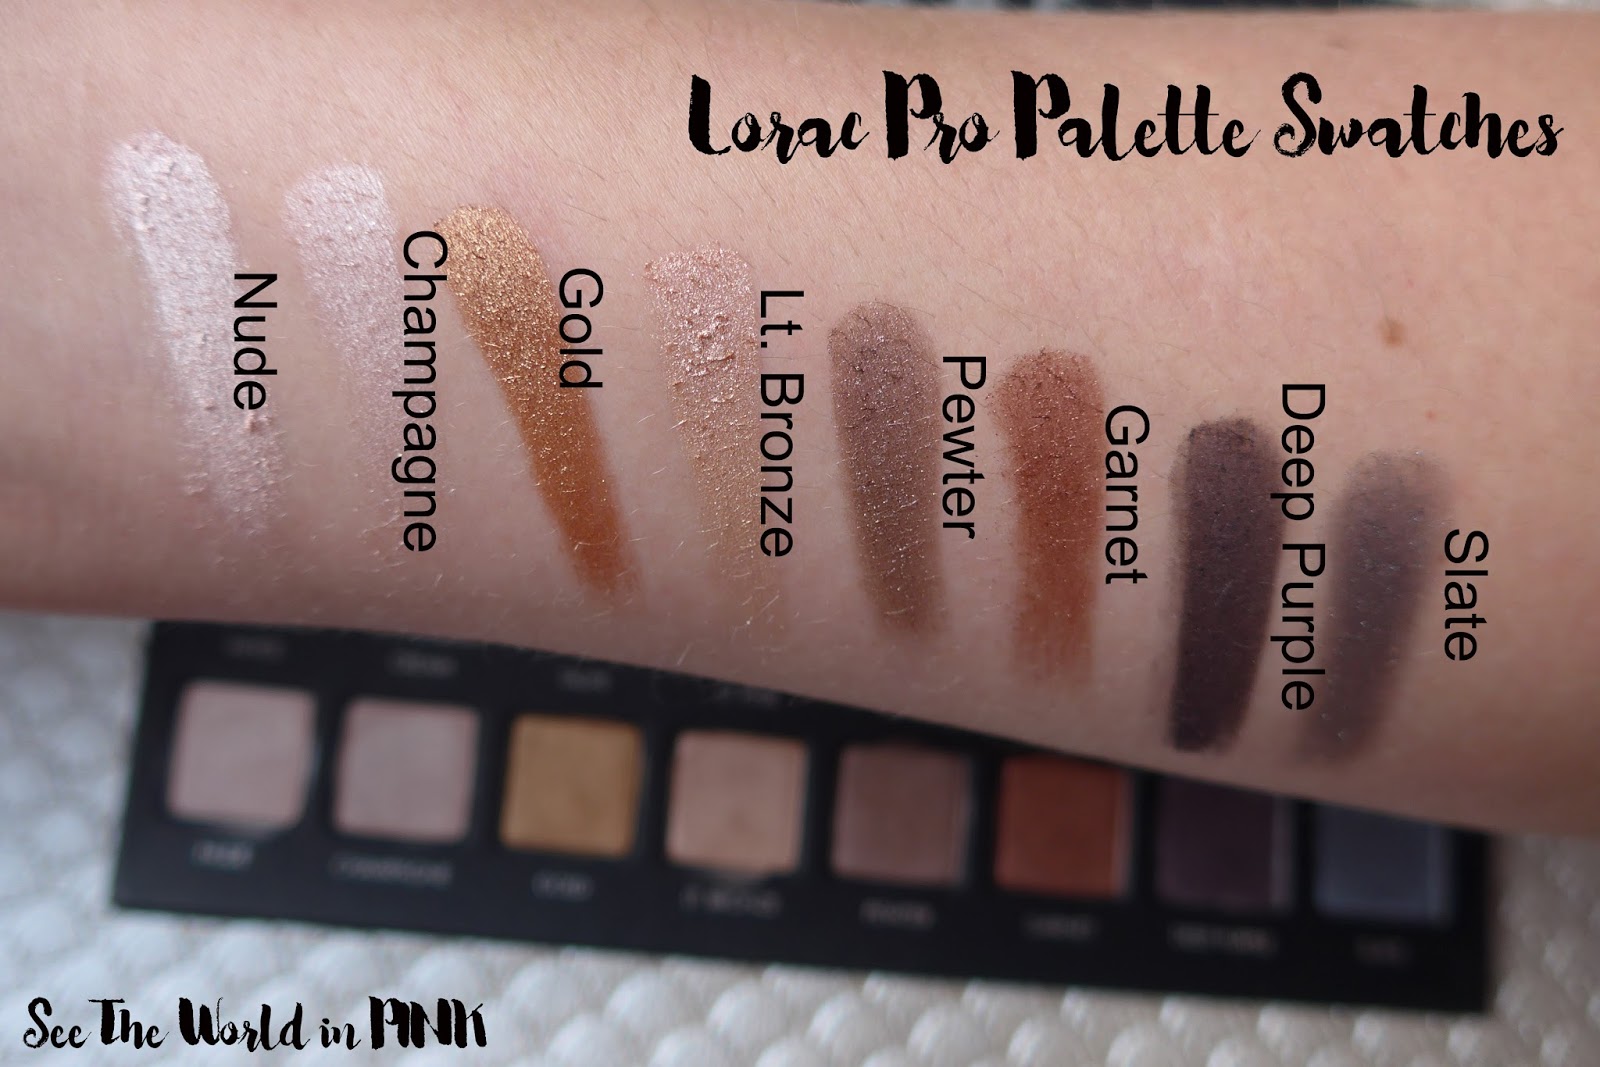 Lorac Pro Palette - Swatches, Makeup Looks, and Review! 